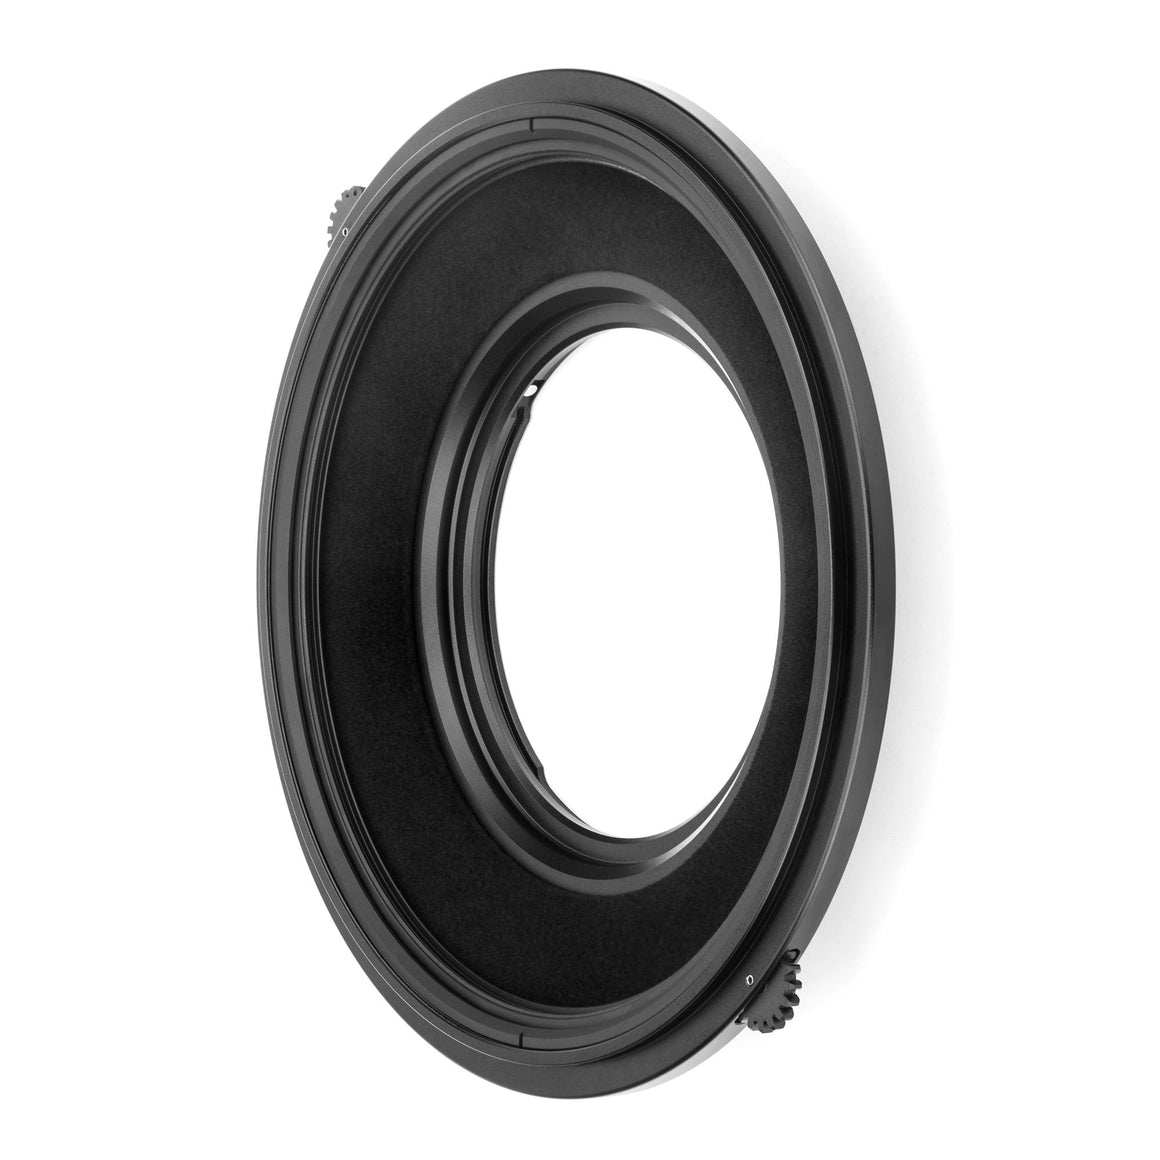 nisi-s6-150mm-filter-holder-adapter-ring-for-laowa-ff-s-15mm-f4-5-w-dreamer